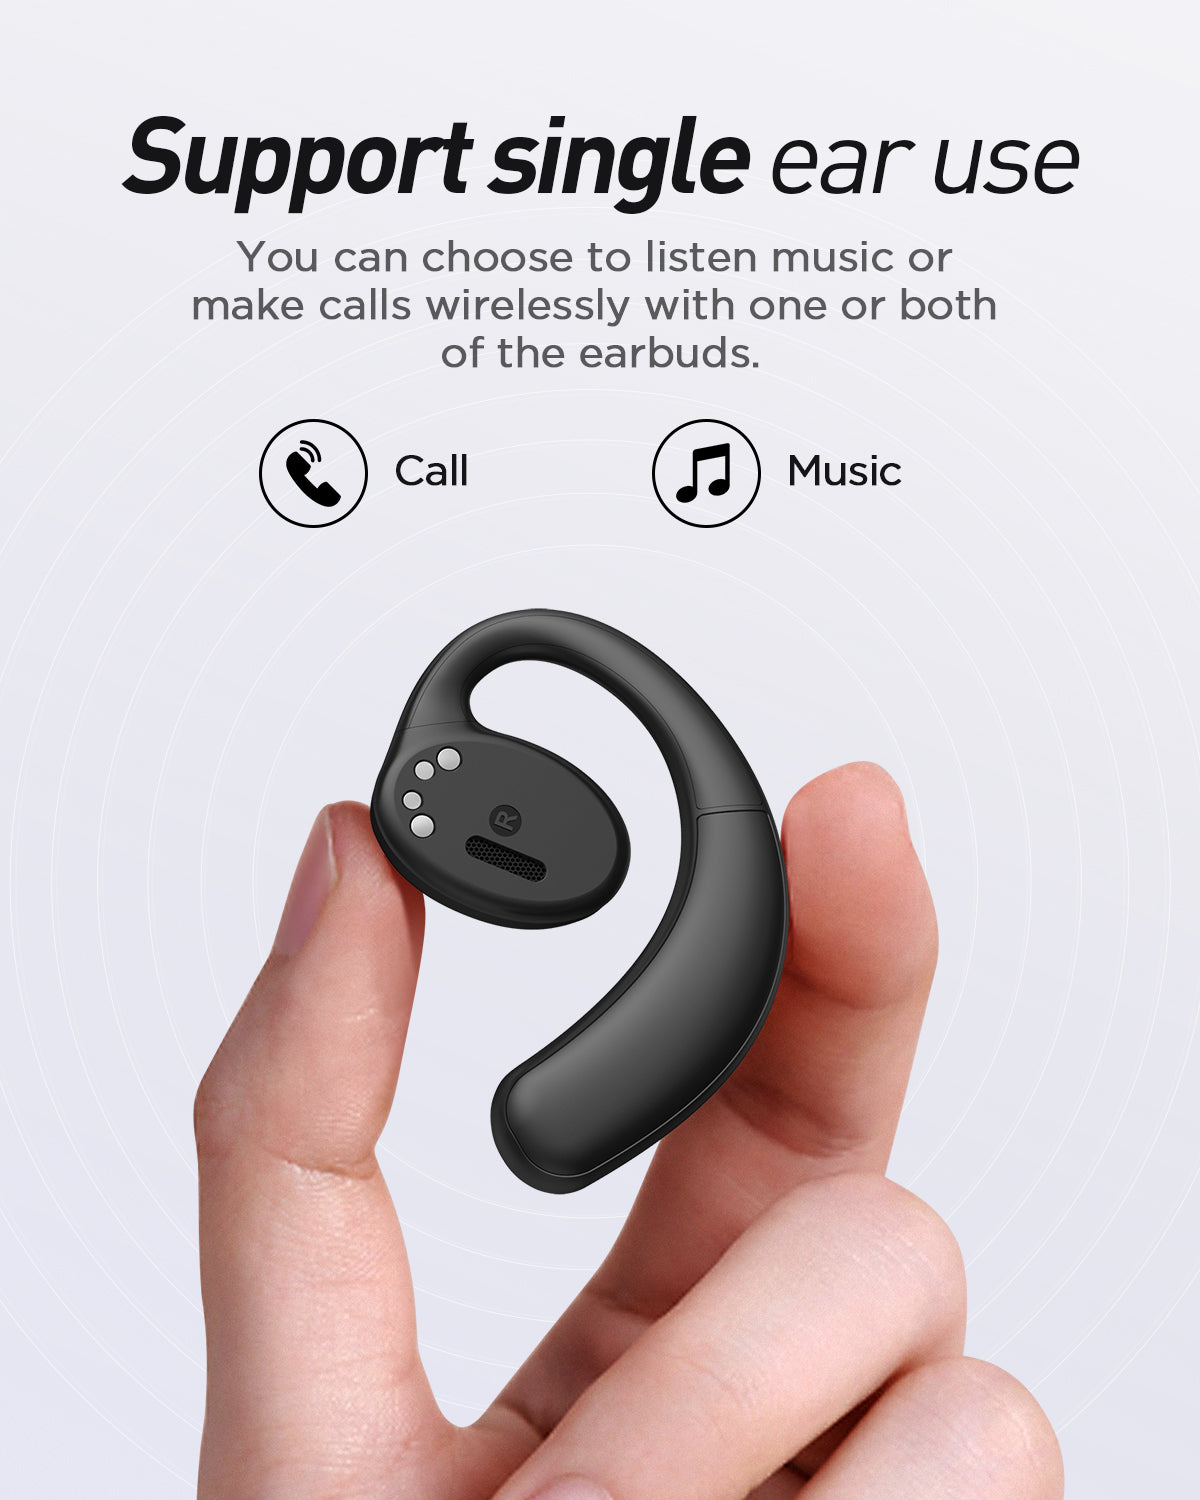 Support single ear use